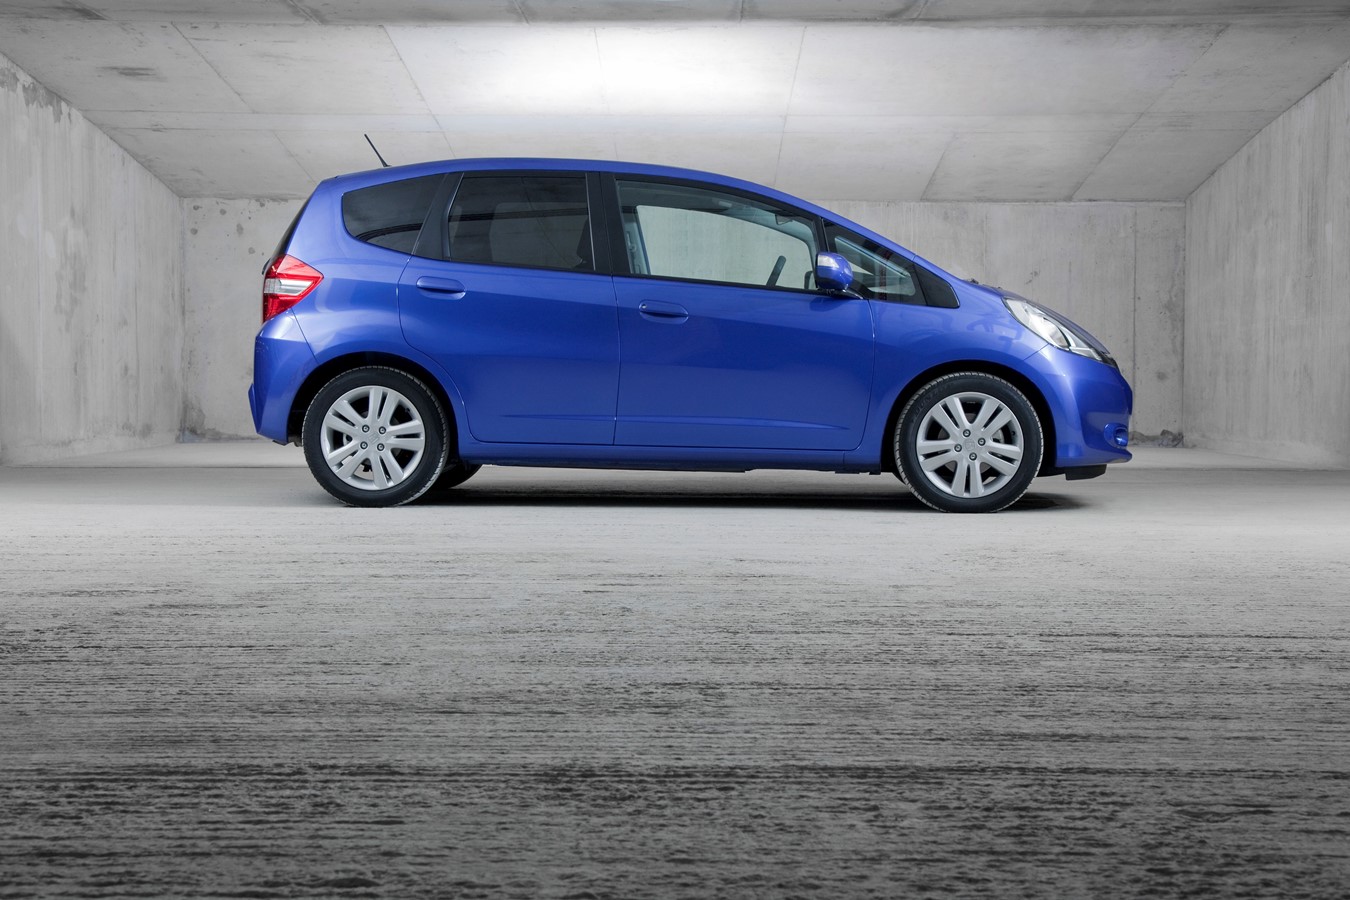 Honda Jazz named Most Reliable Car by Carbuyer